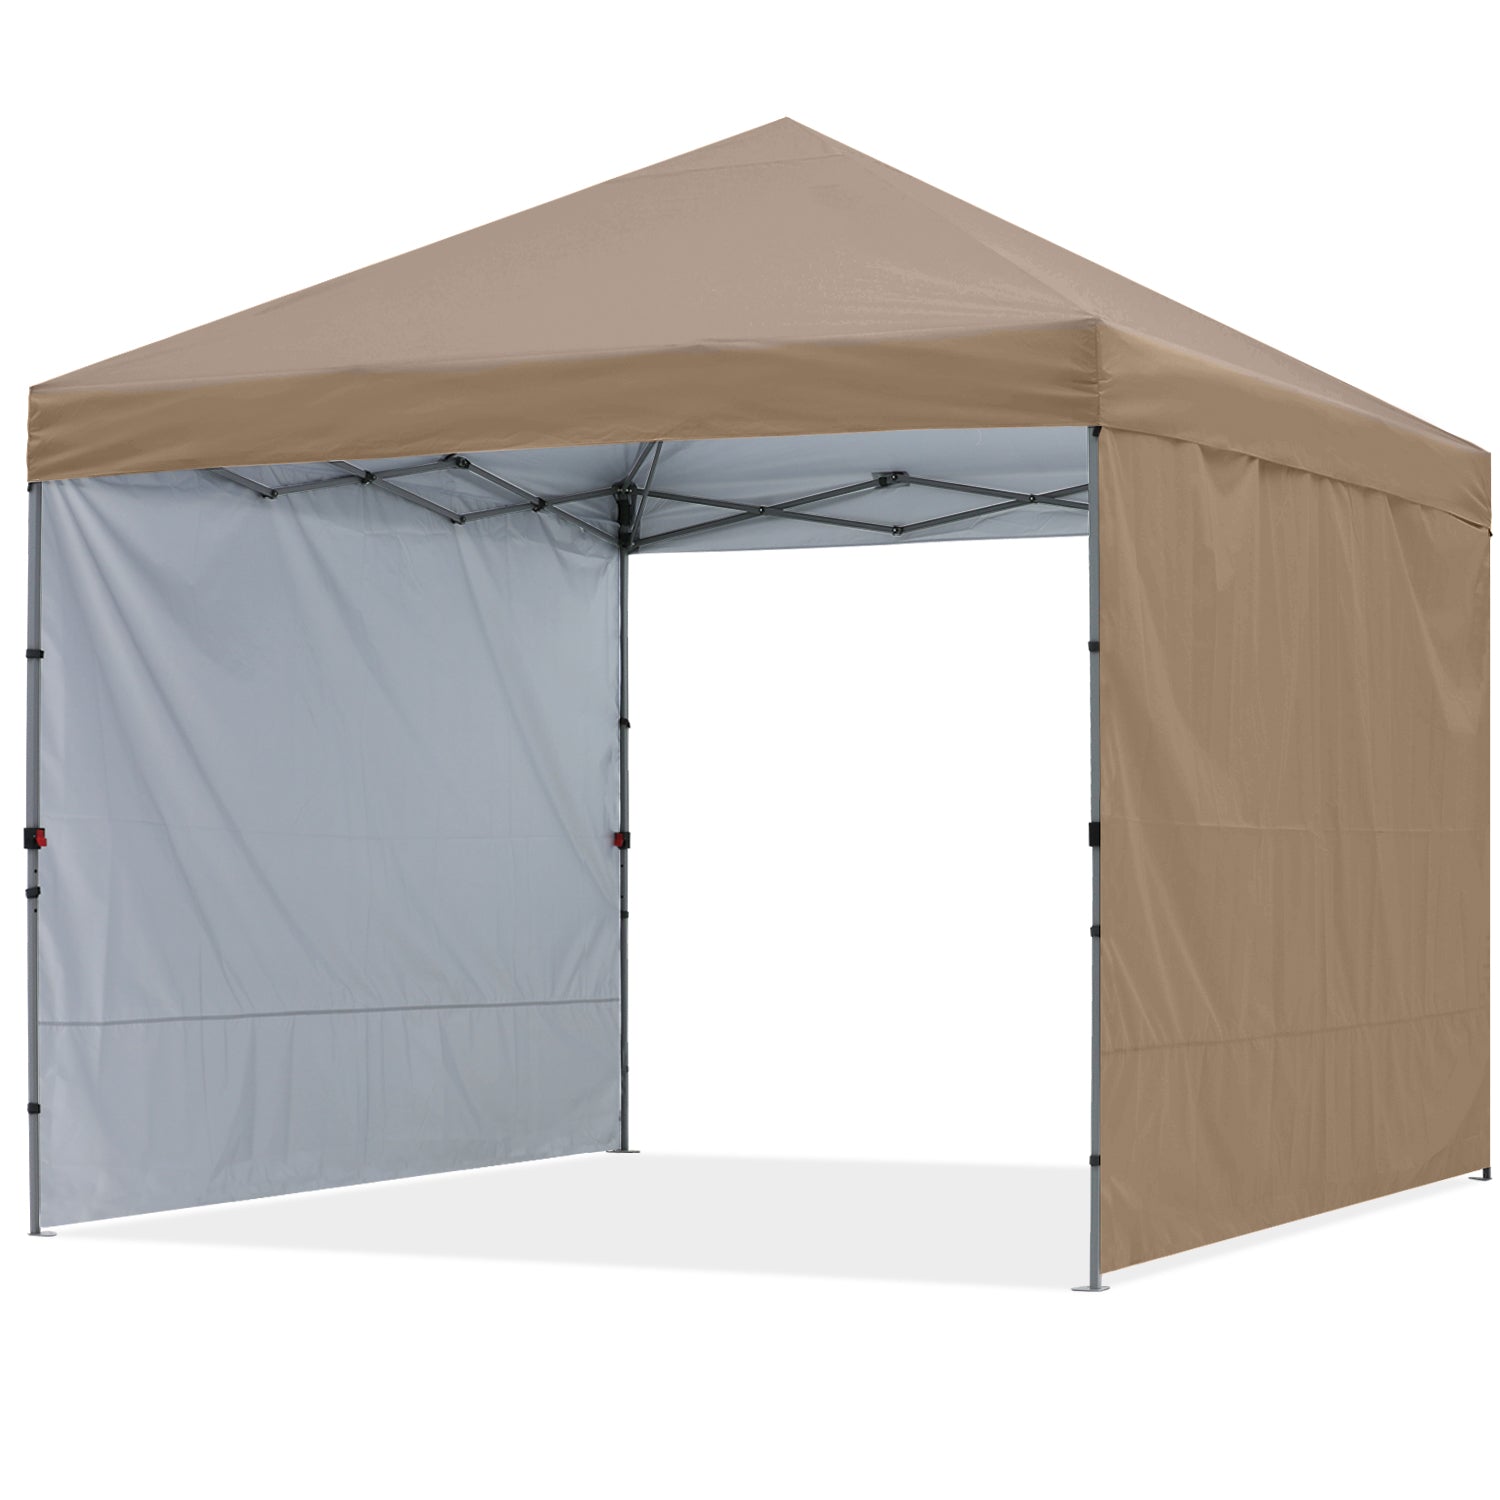 Outdoor Easy Pop up 10x10/8x8/6x6 Canopy Tent With 2 Sun Walls